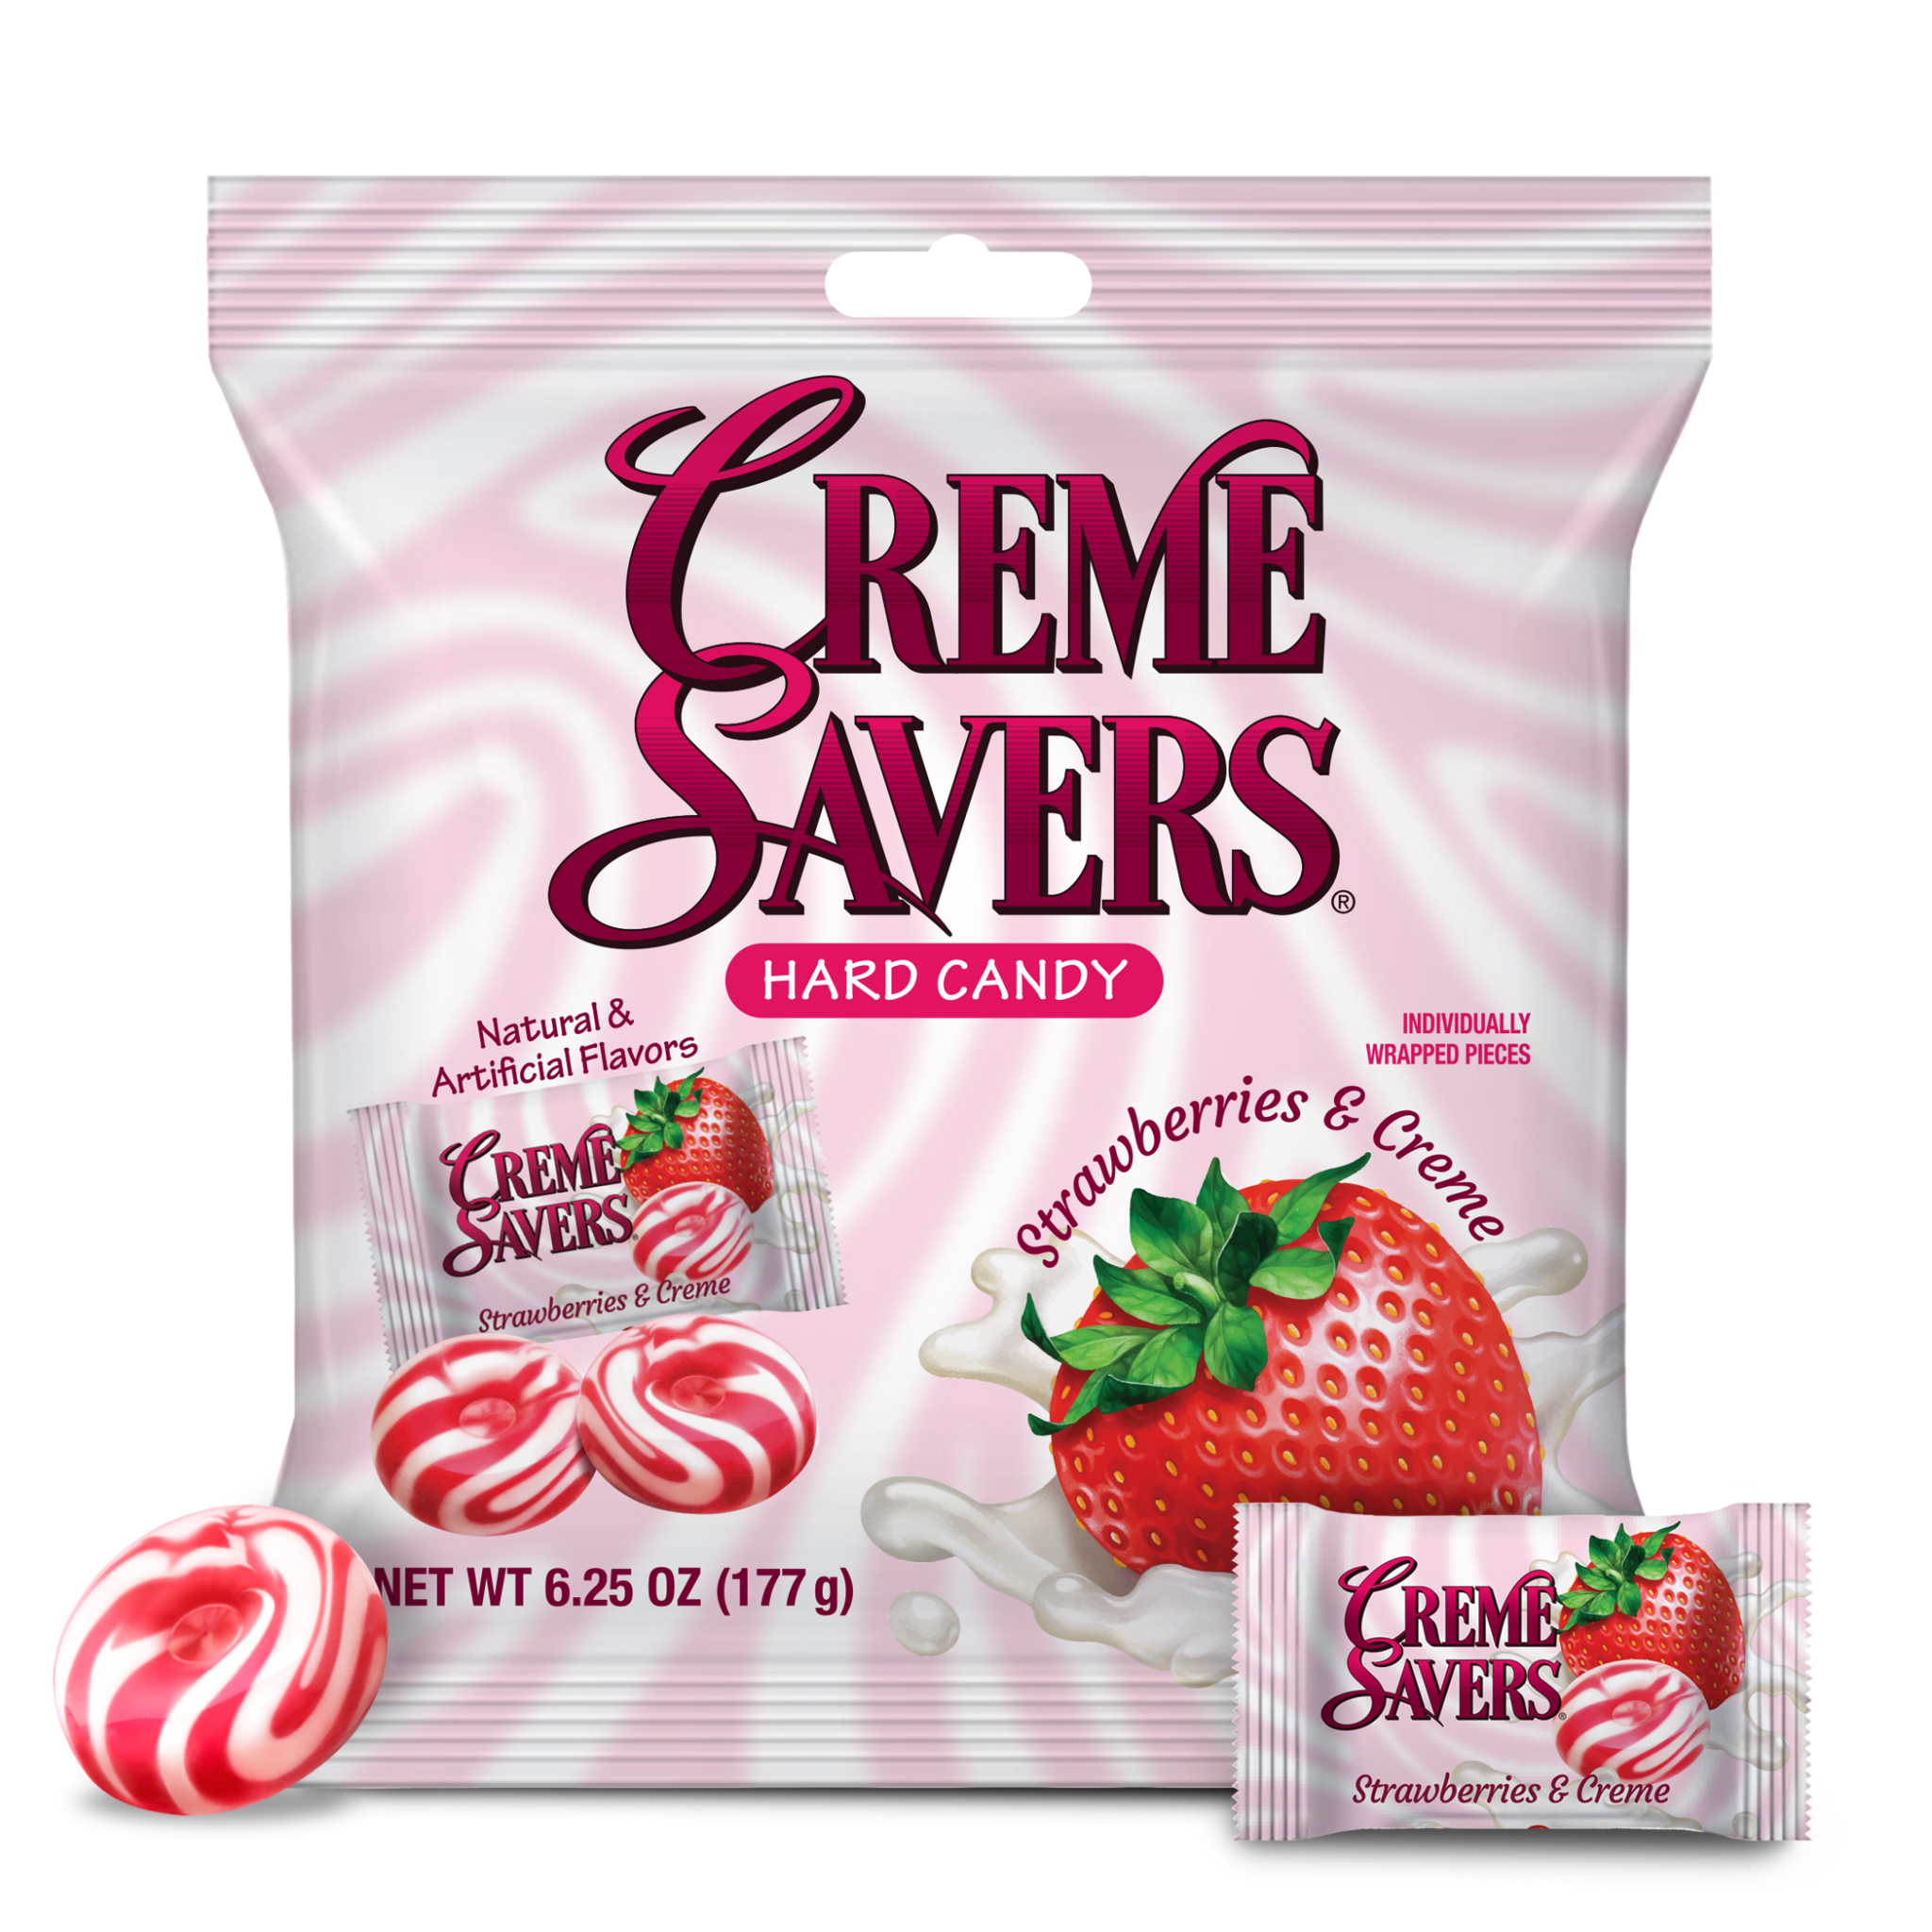 Charms are a favorite old timey retro candy. These hard candies come in  assorted flavors including cherry, grape, le…